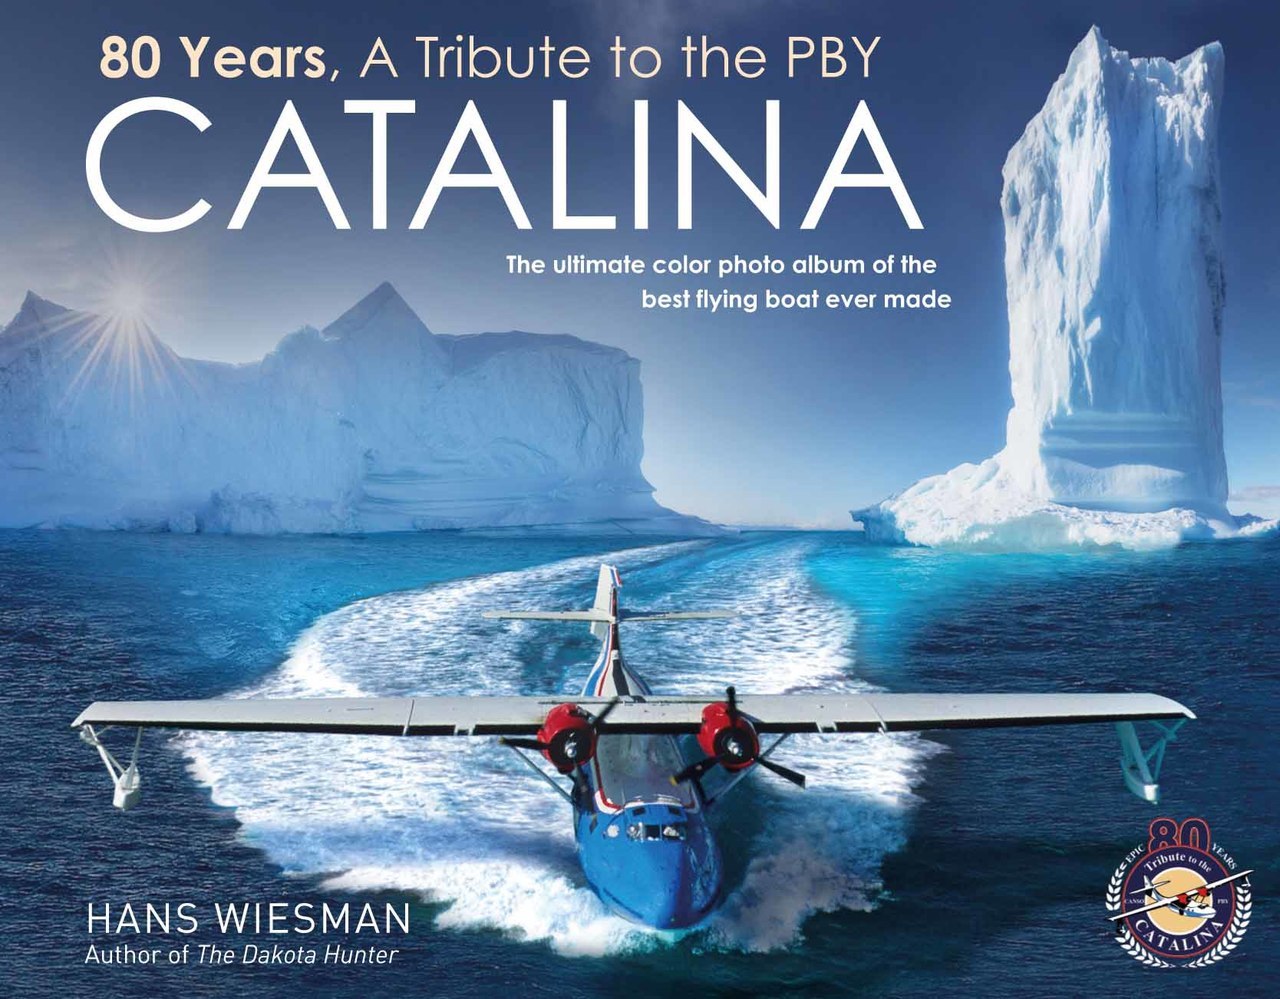 80 Years, A Tribute to the PBY Catalina